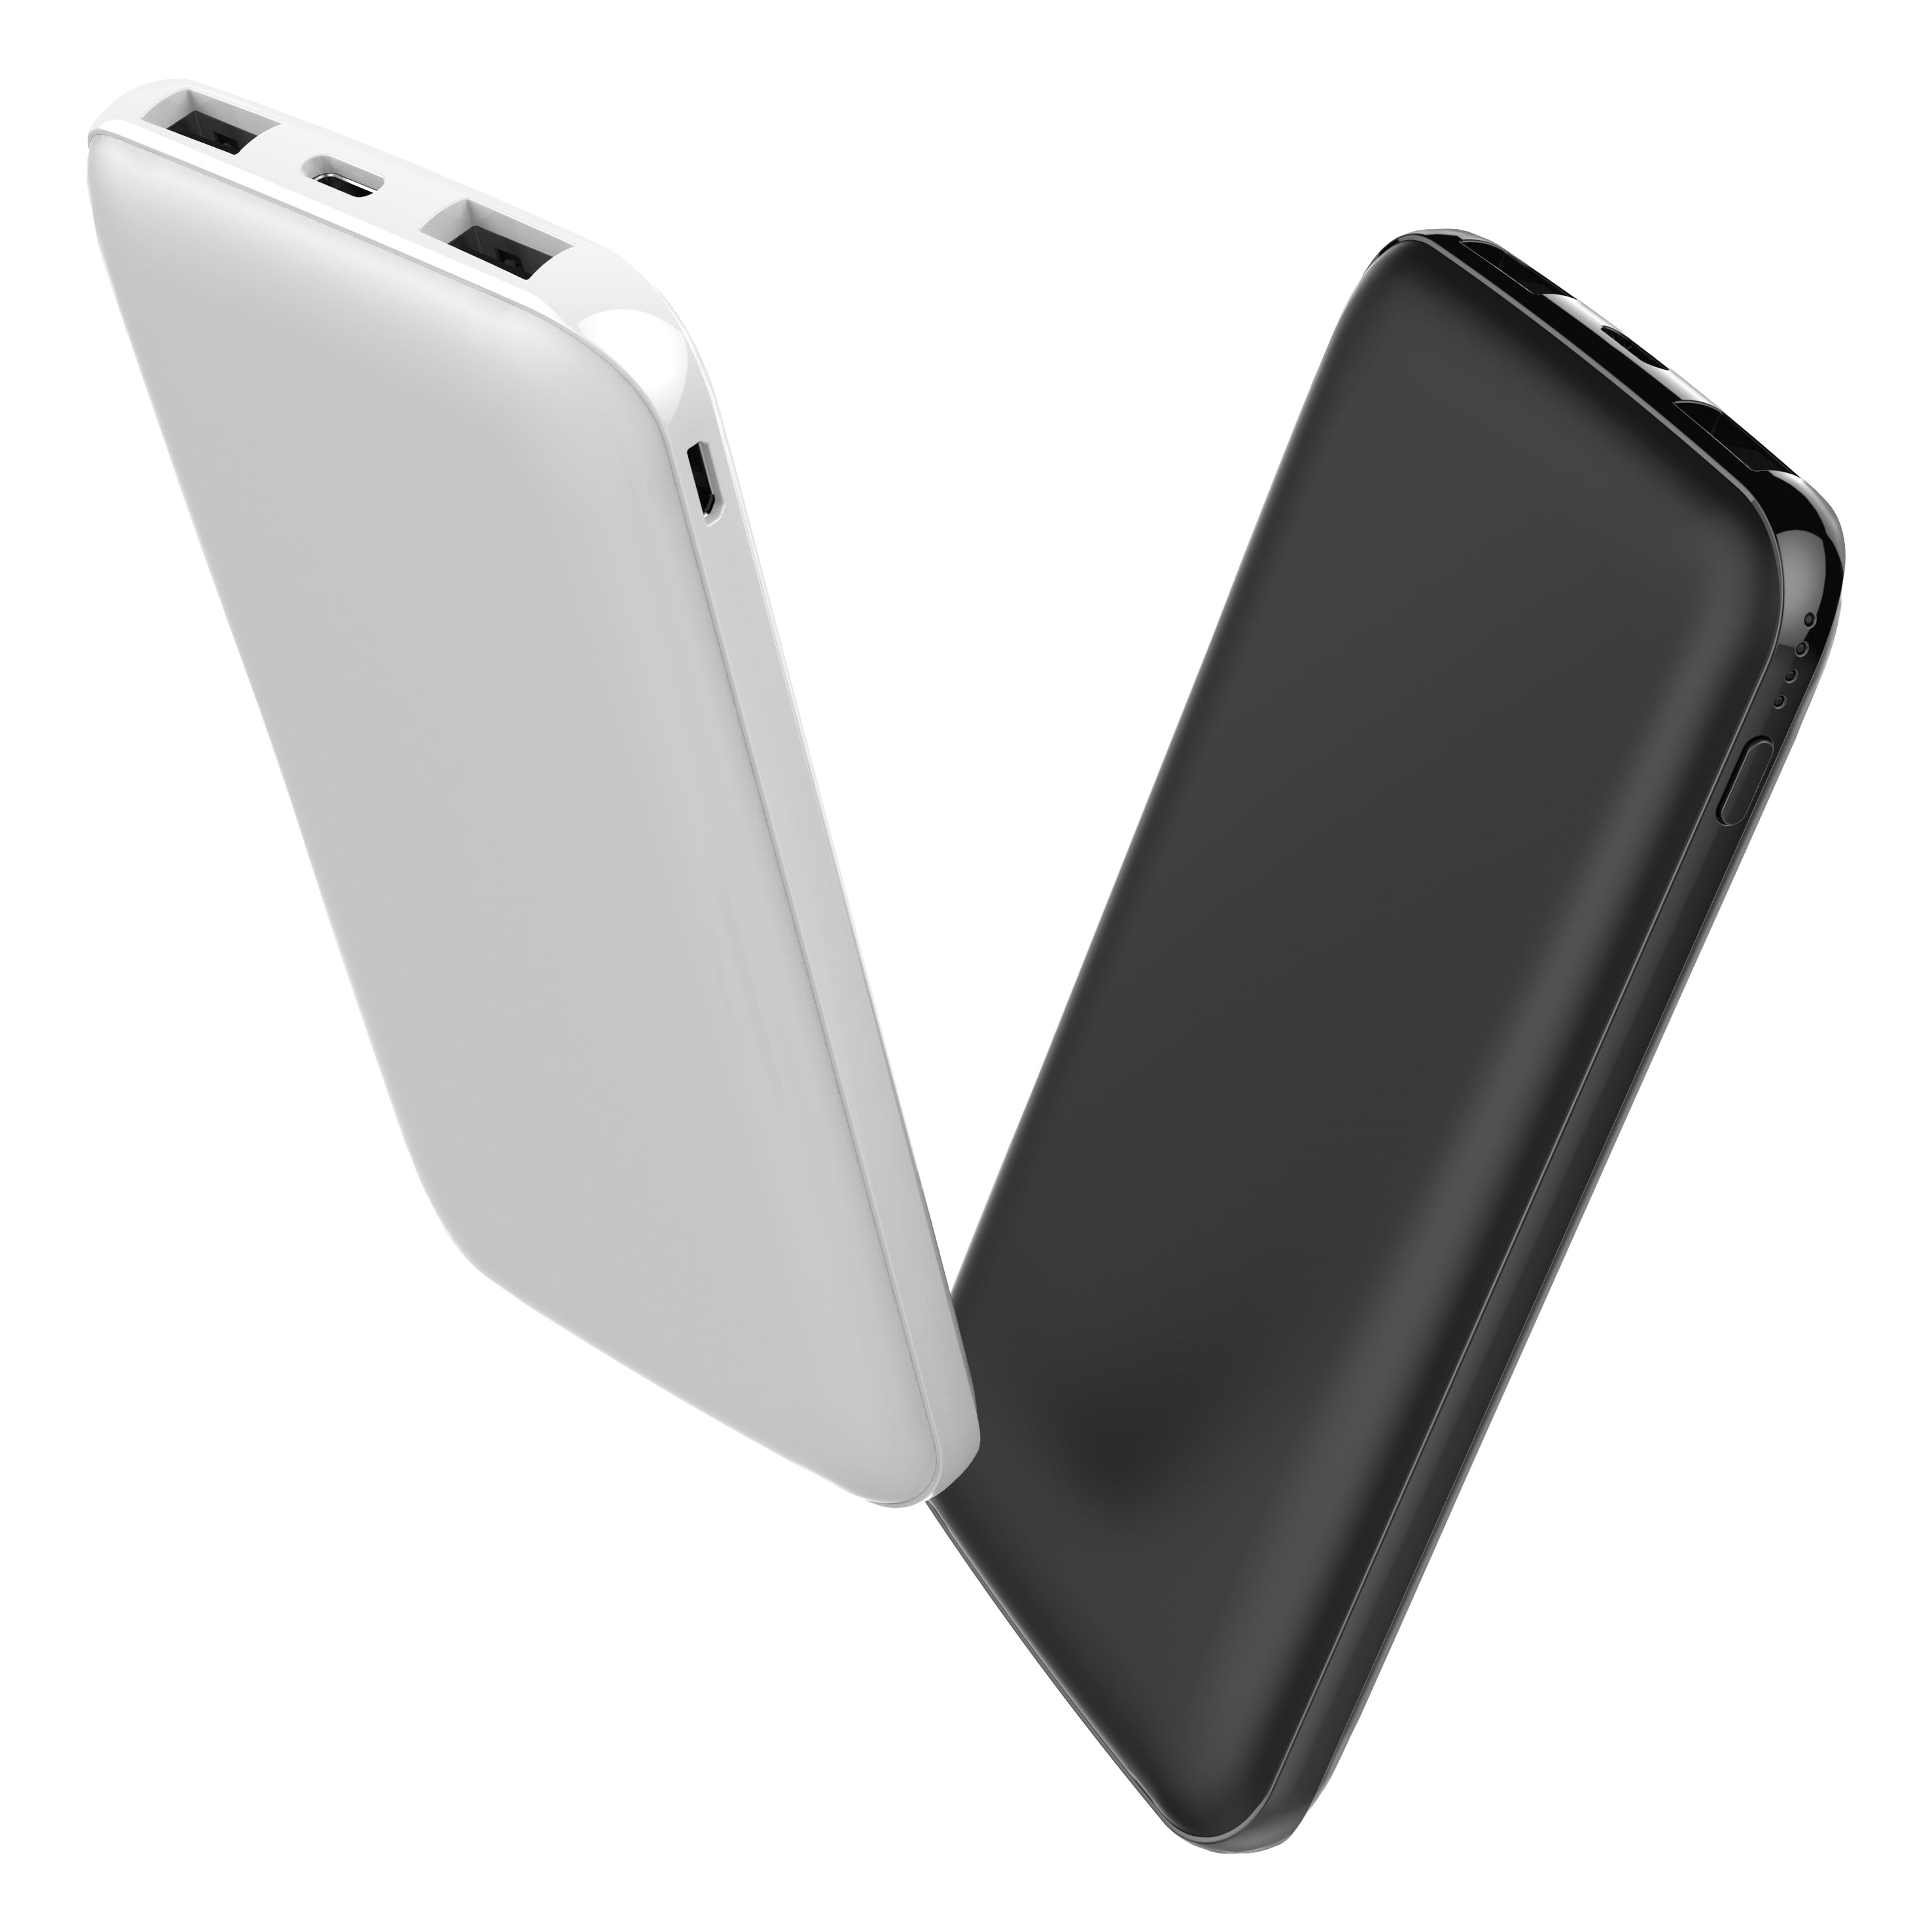 REF Power Fast Charge "C-Port" Portable Power Bank in Black and White